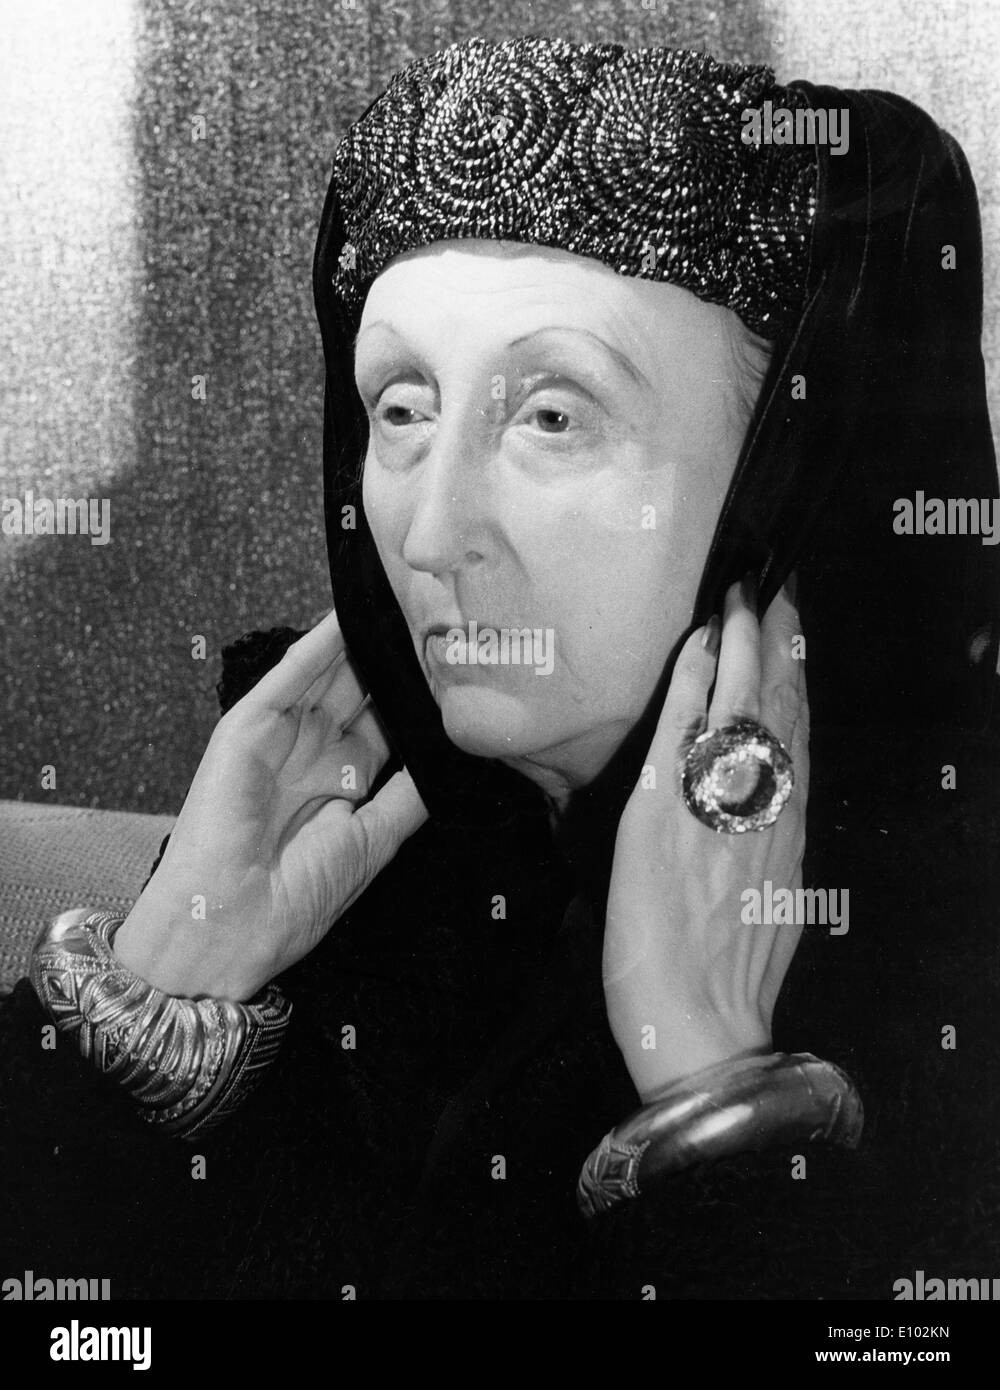 Dame EDITH SITWELL DBE (September 7, 1887 - December 9, 1964) was a British poet and critic. Stock Photo